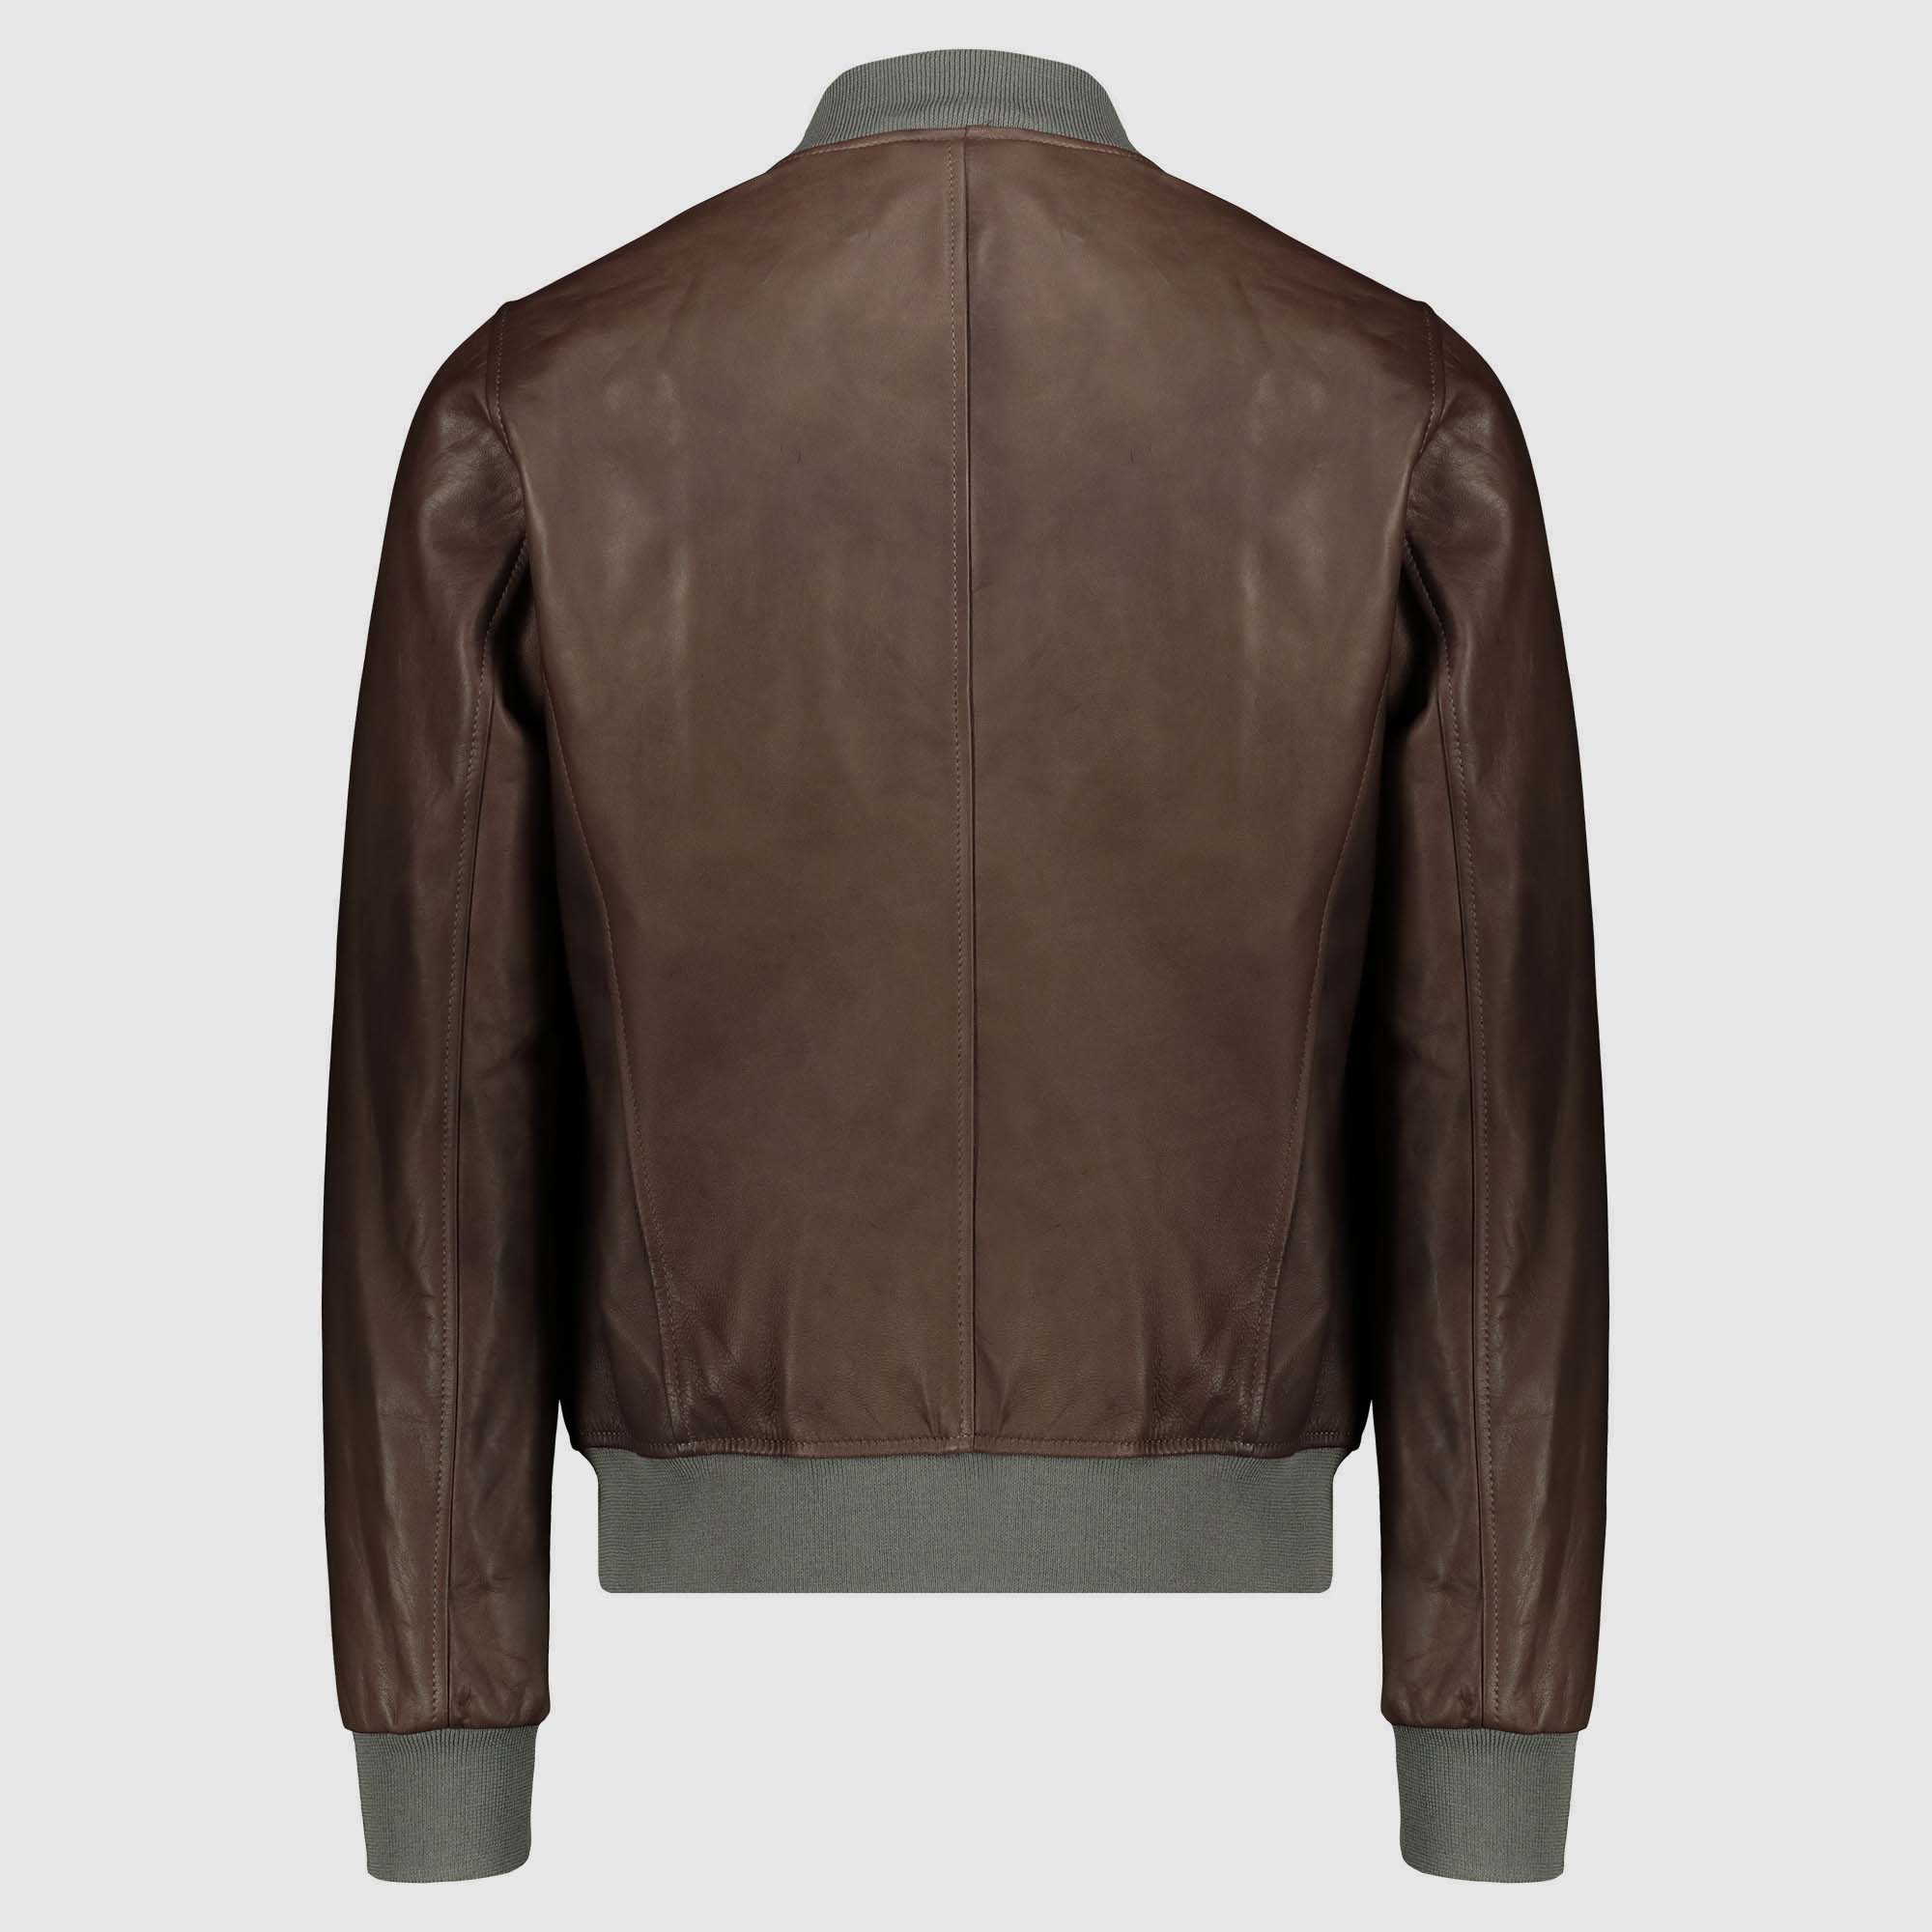 Bomber jacket in a brown natural leather | Barròco Italia